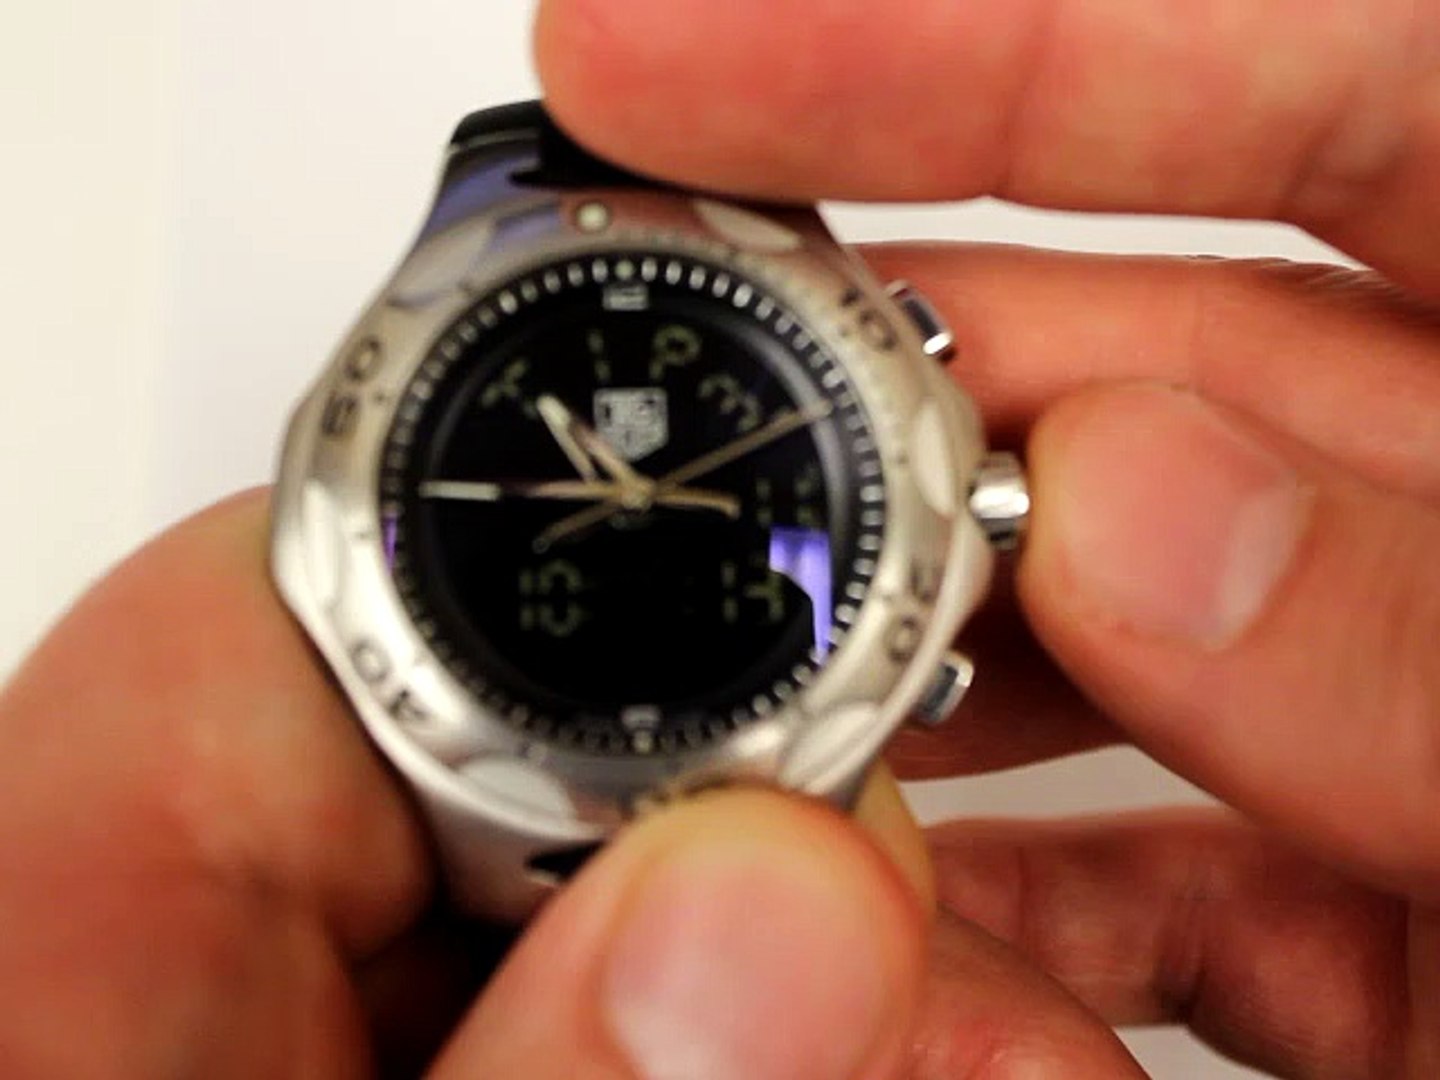 How to set a TAG Heuer Kirium Formula 1 CL111A watch and use the functions